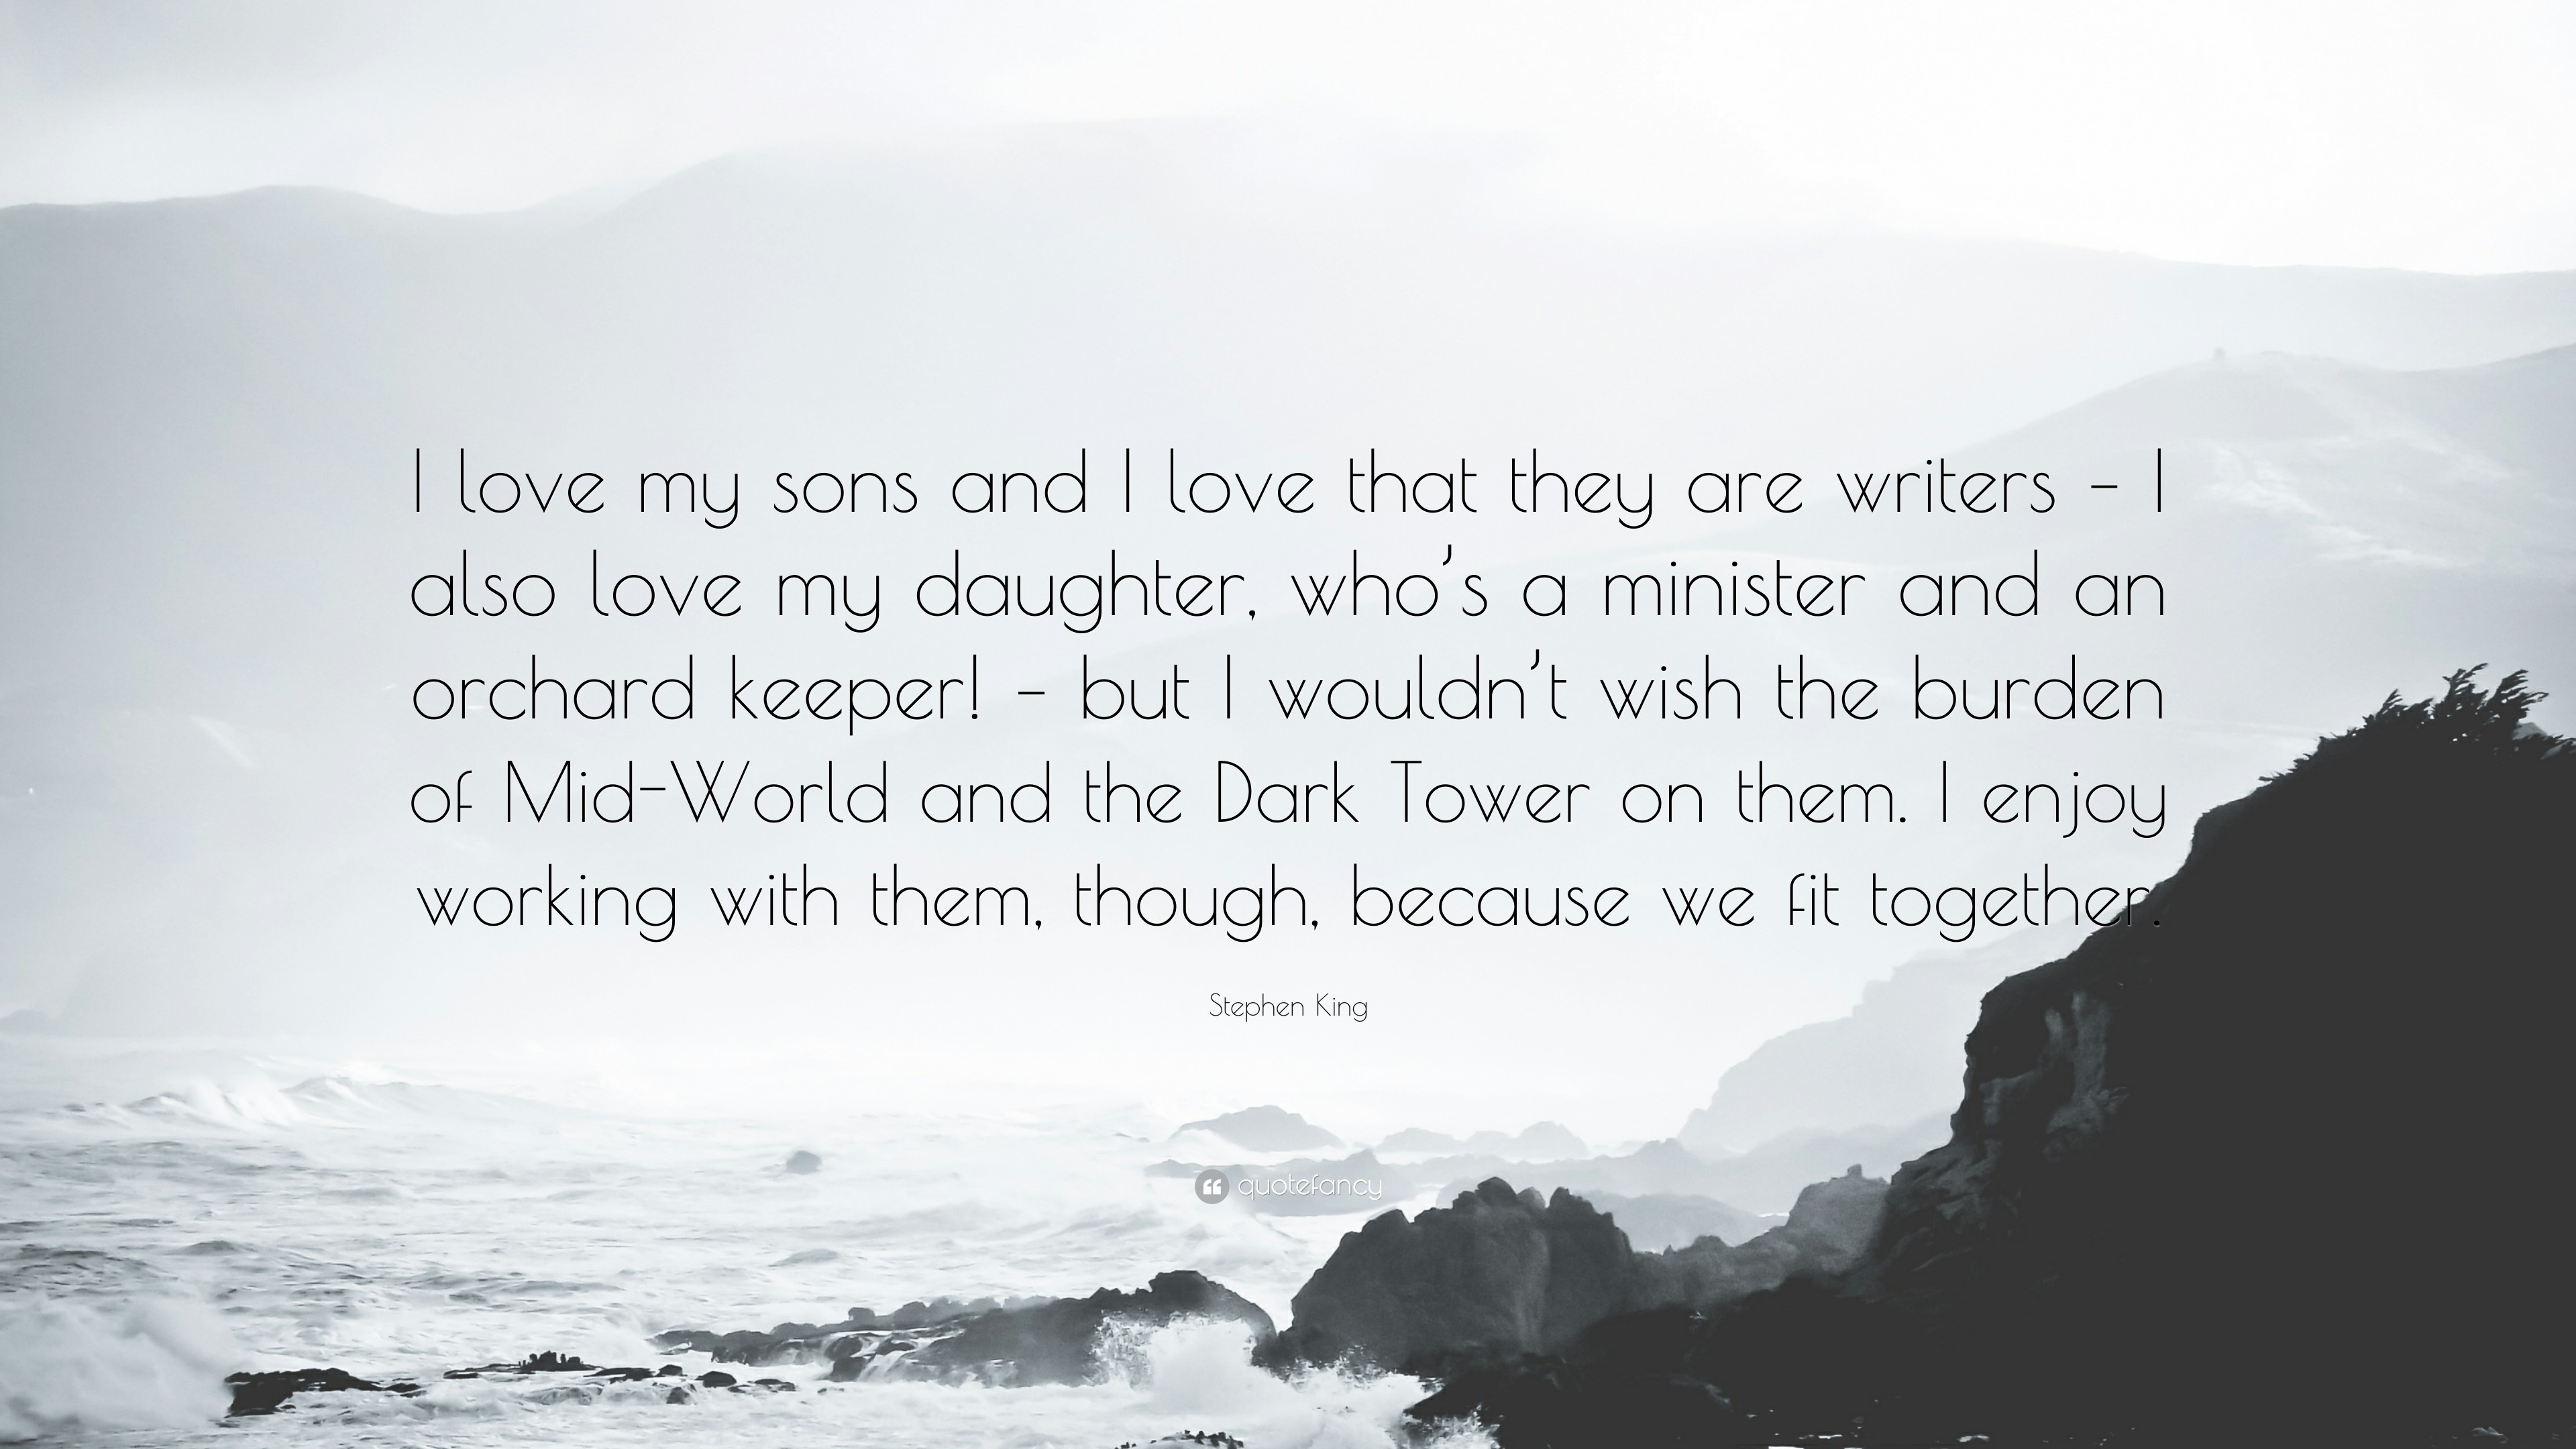 3840x2160 Stephen King Quote: “I love my sons and I love that they are writers